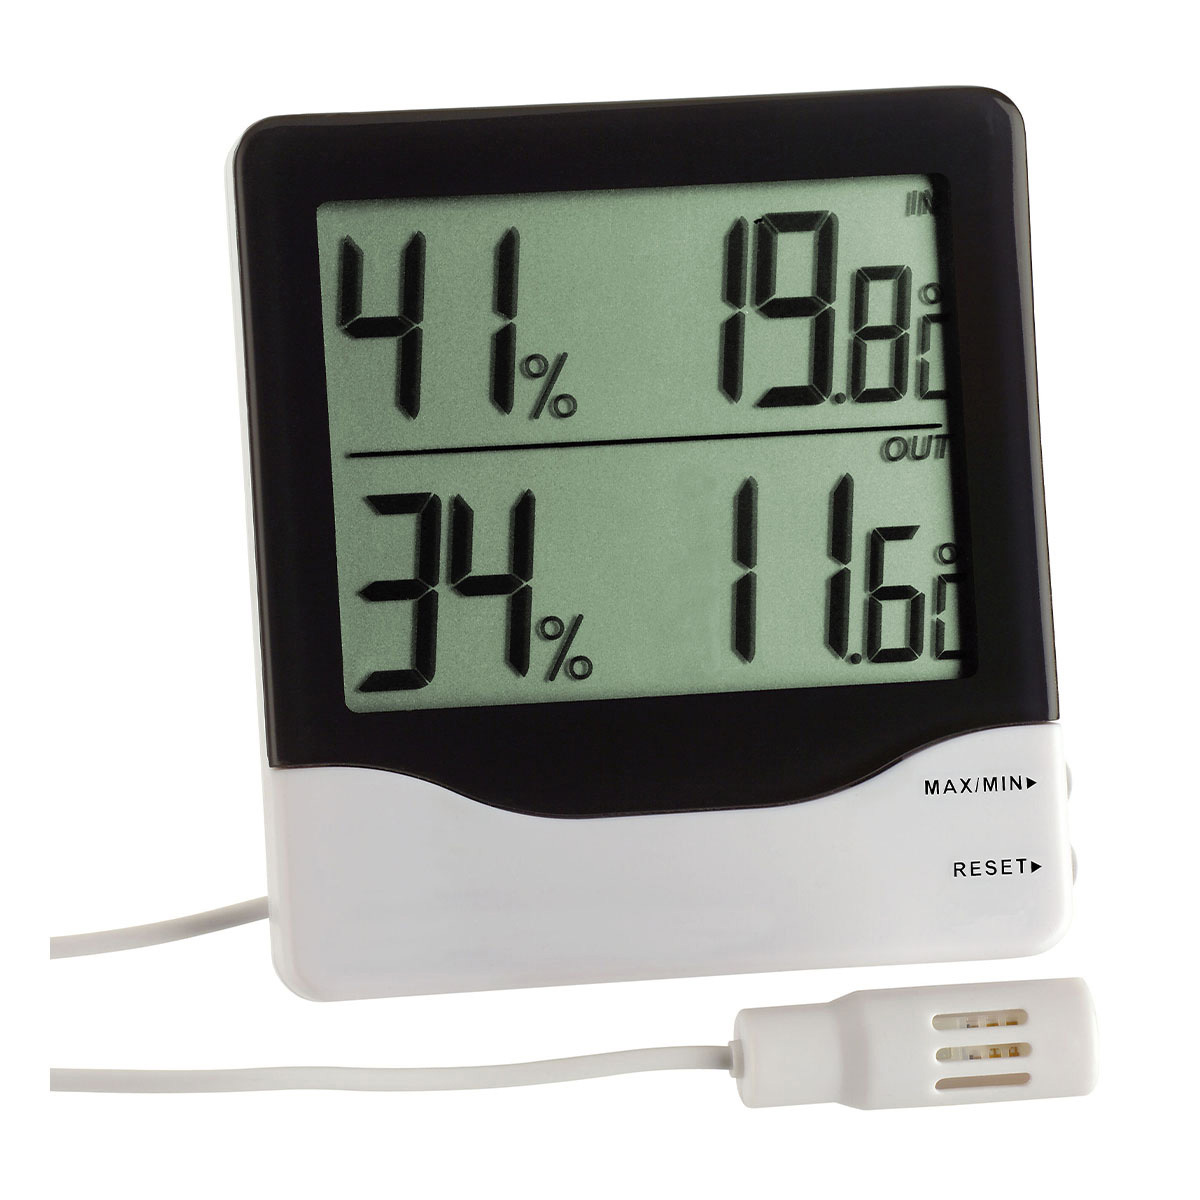 Digital thermo-hygrometer for indoor and outdoor climate